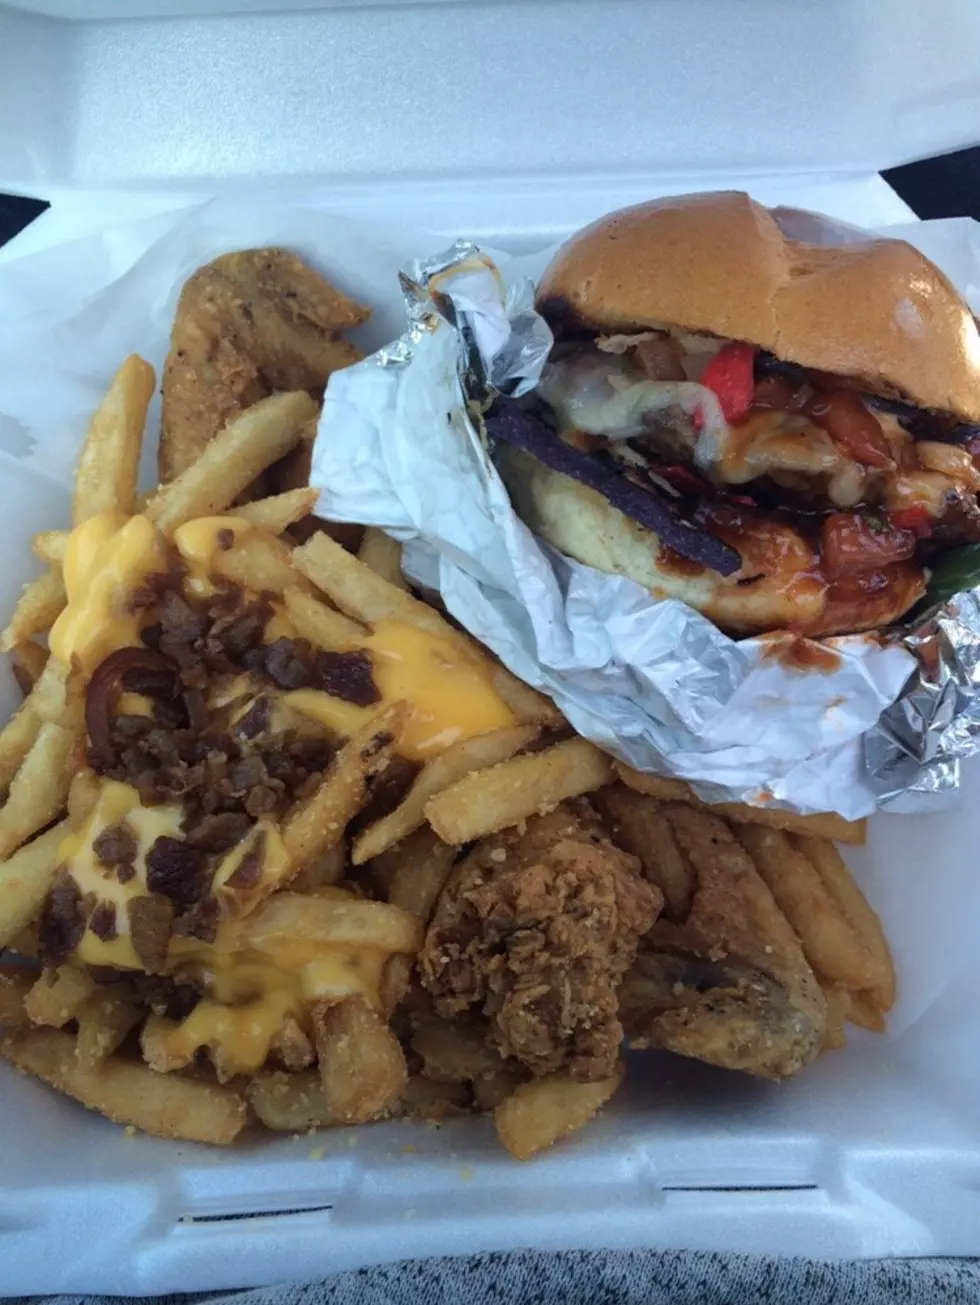 The Best 8 Burger Joints in Rockford According to Yelp